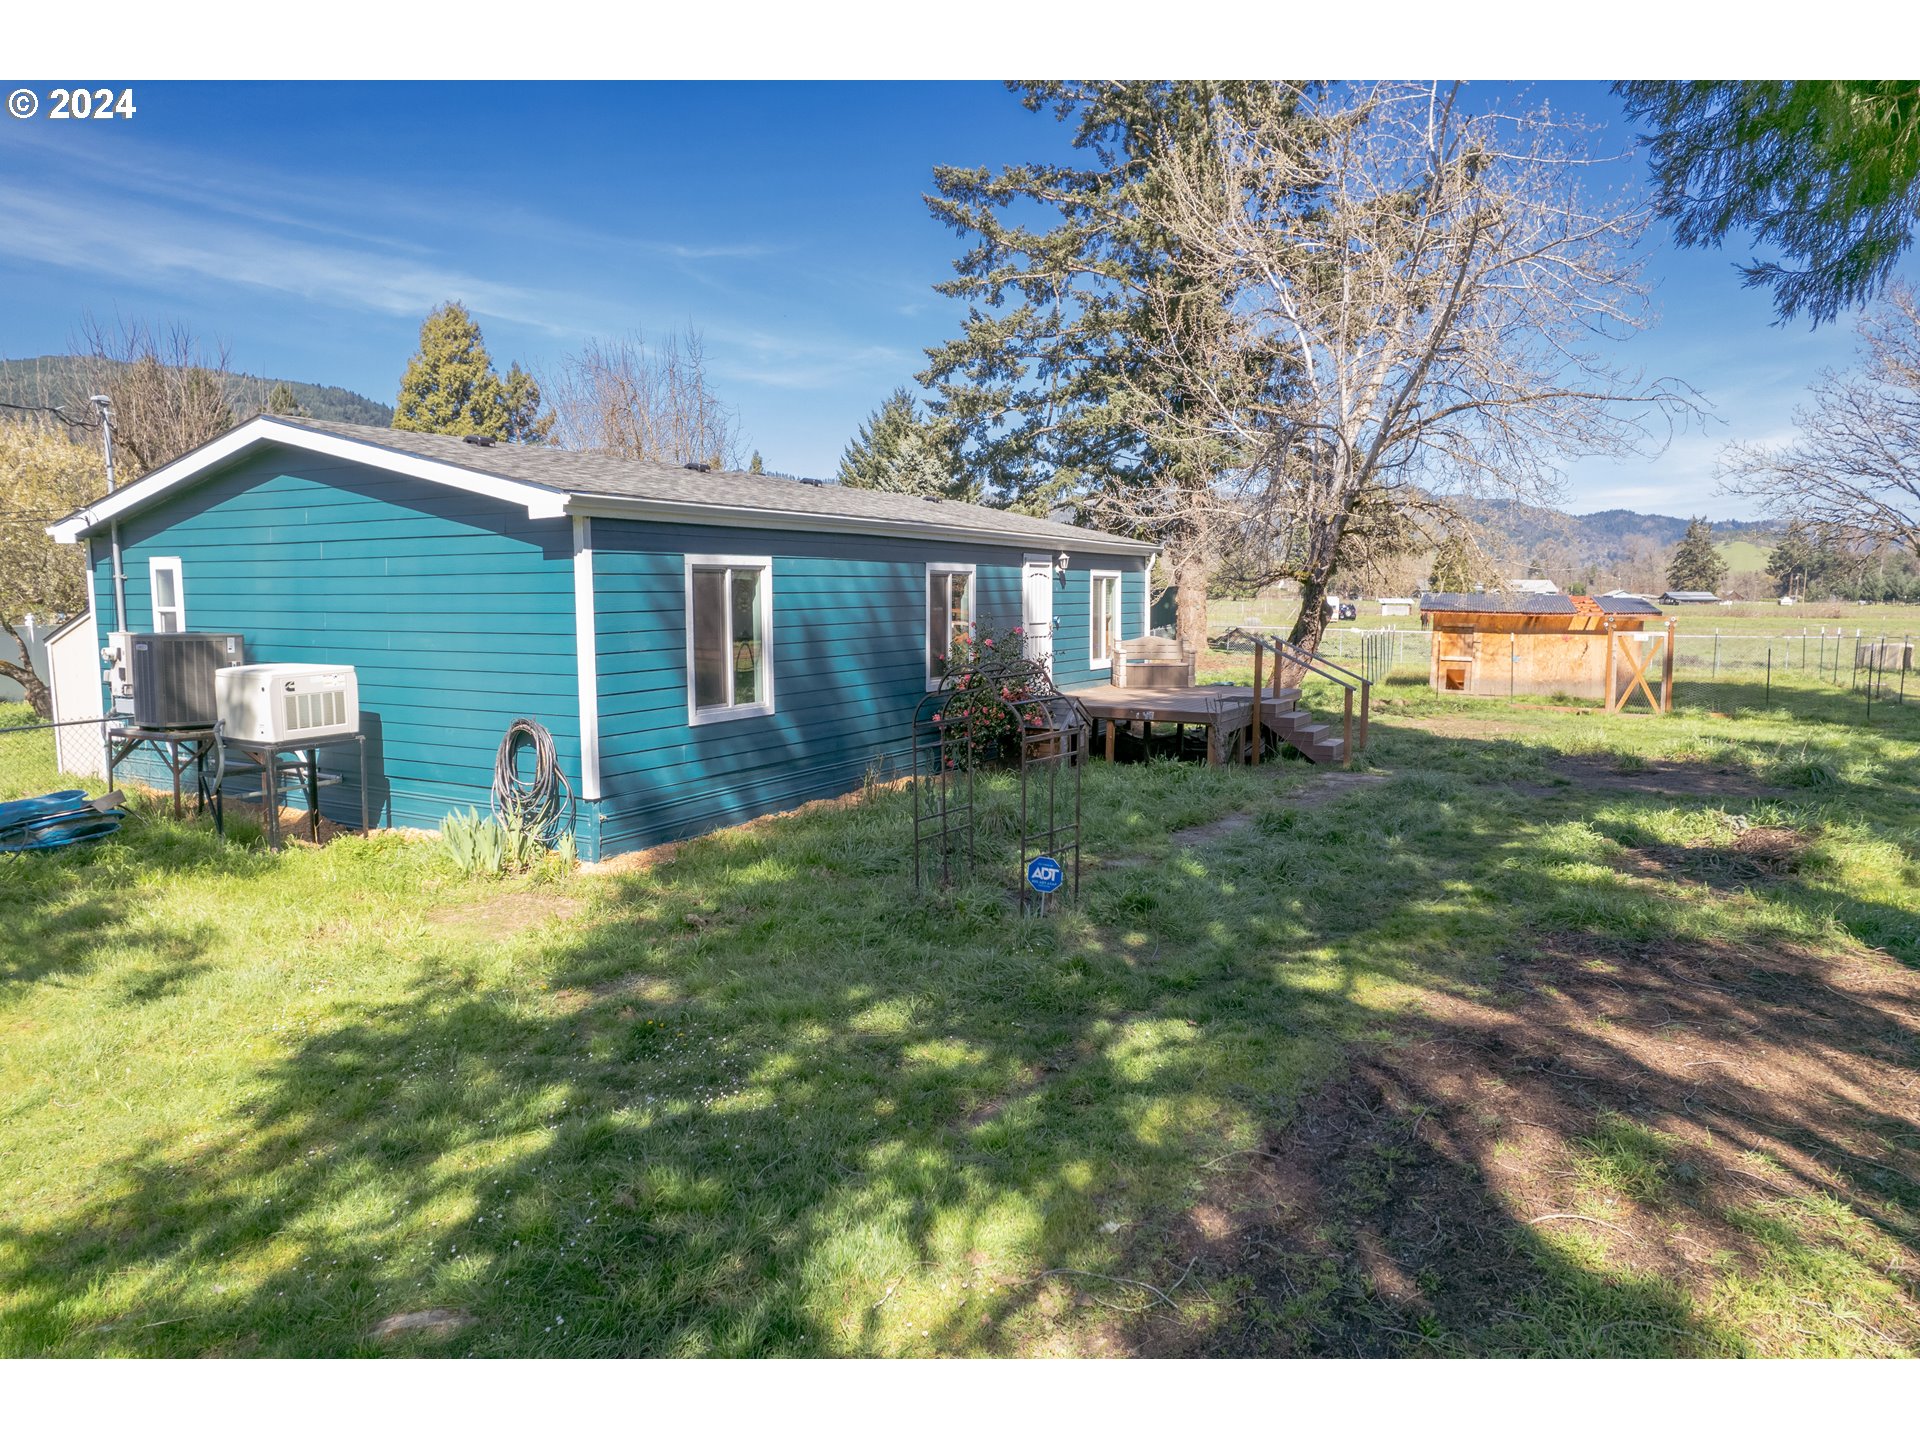 238 BALL LN, Riddle, OR 